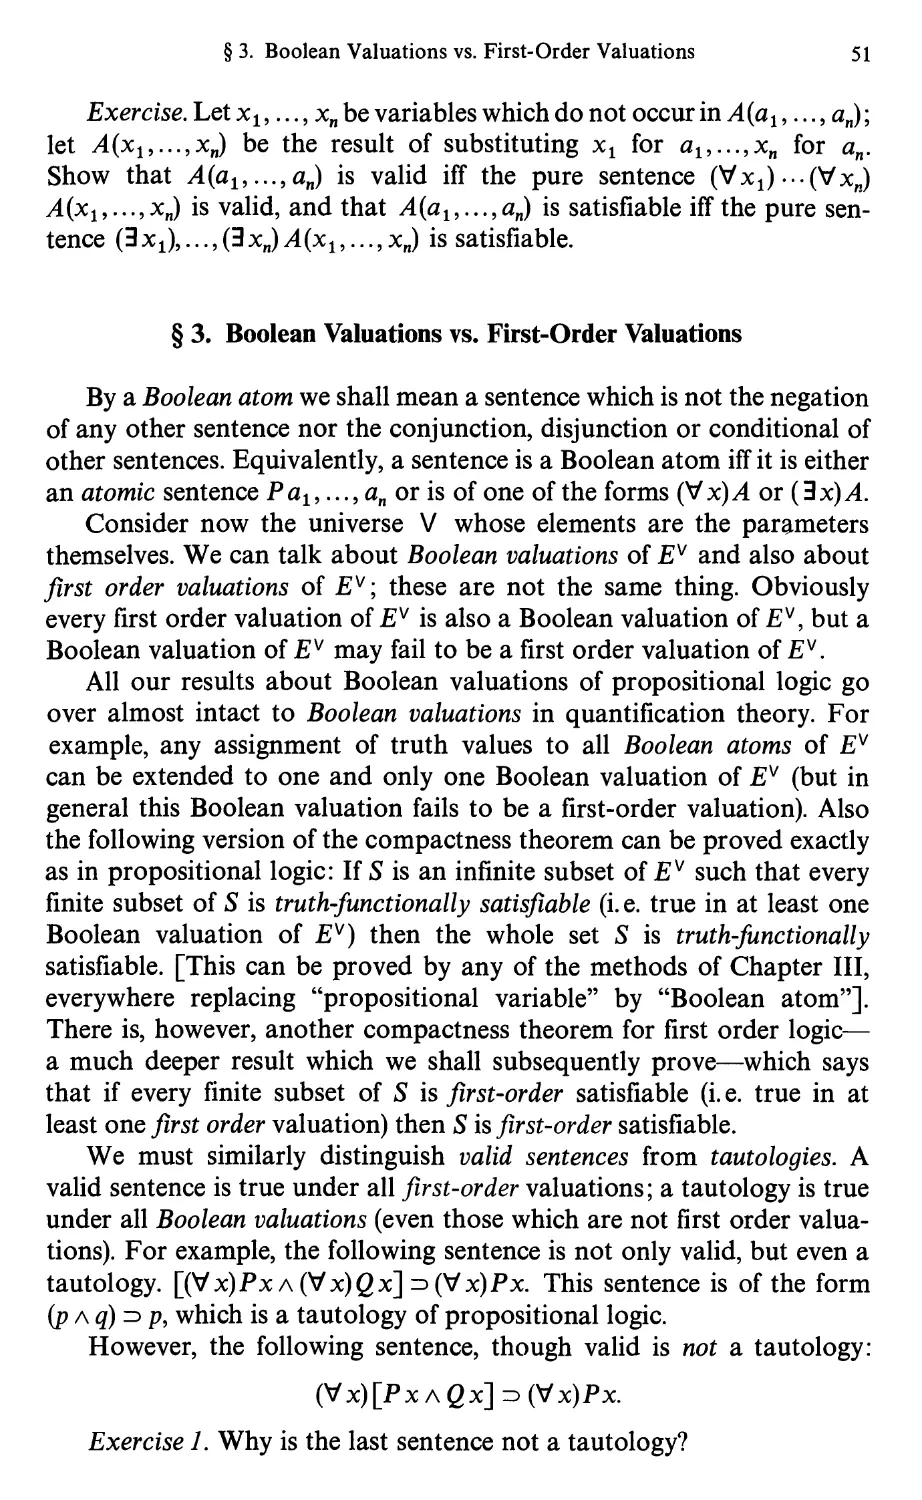 4.3 Boolean Valuations vs. First-Order Valuations